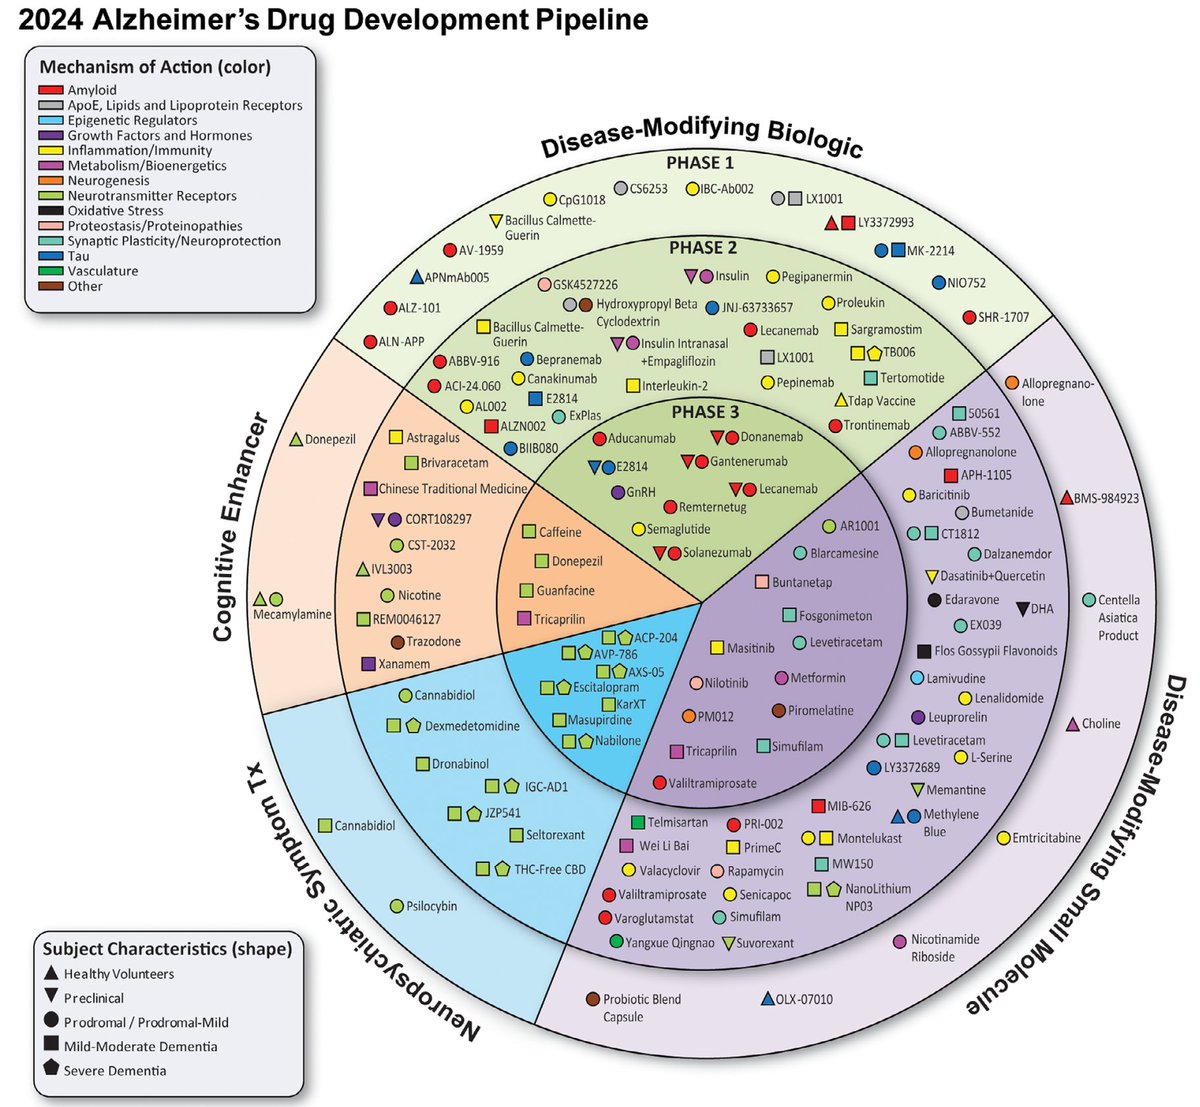 The Alzheimer's disease 2024 drug development pipeline An often heard critique is that the Alzheimer field is too “amyloid-centric”. The Figure below actually shows a well-diversified drug pipeline, which is highly needed. The mechanisms of action (CADRO) for agents currently